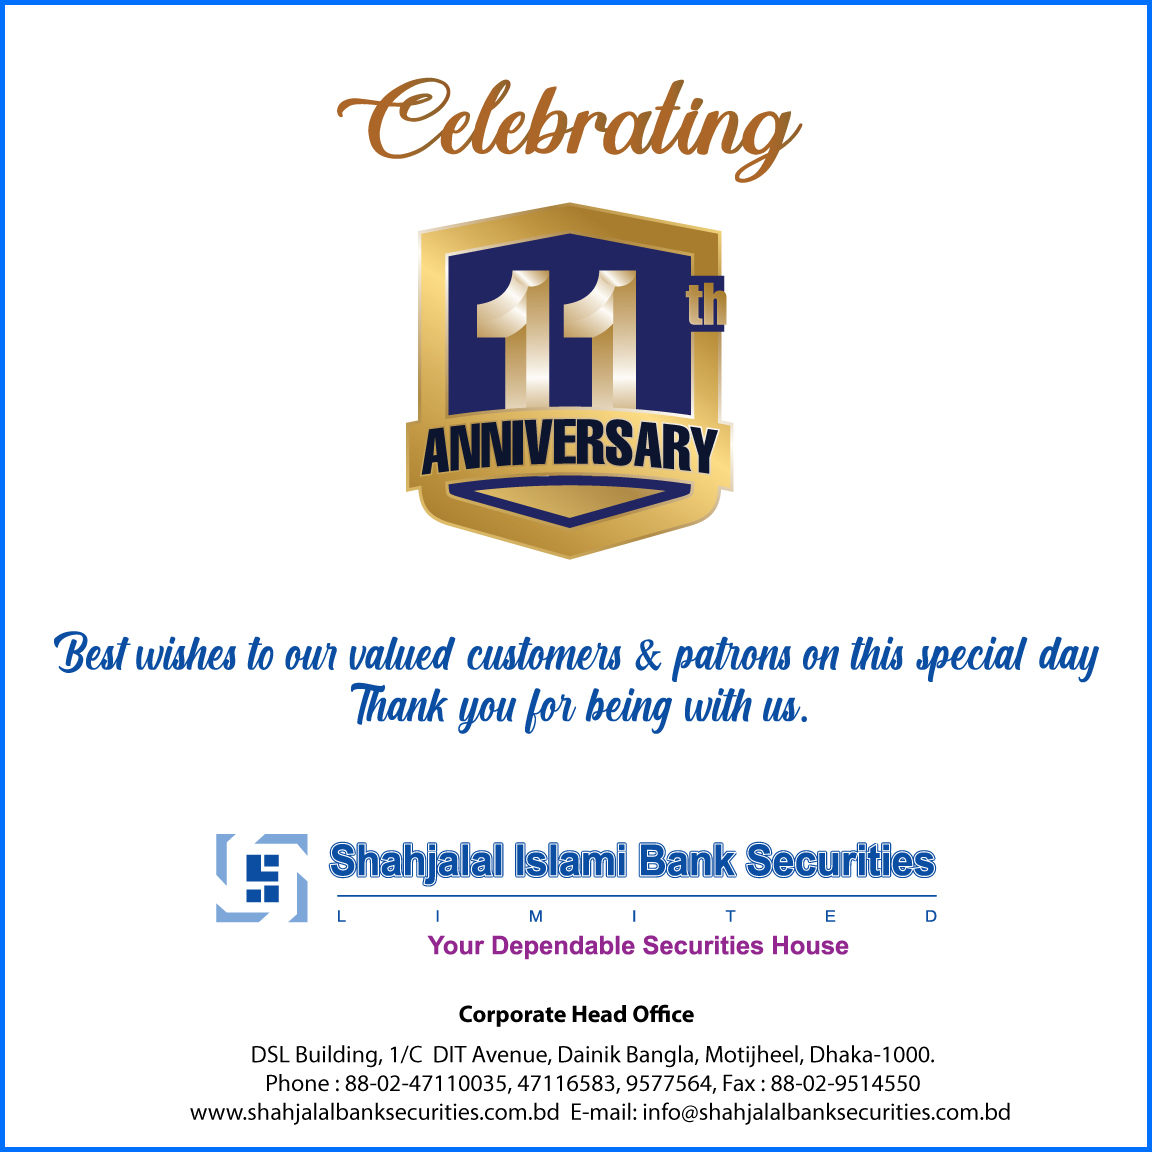 11th anniversary celebrating of Shahjalal Islami Bank Securities Limited.